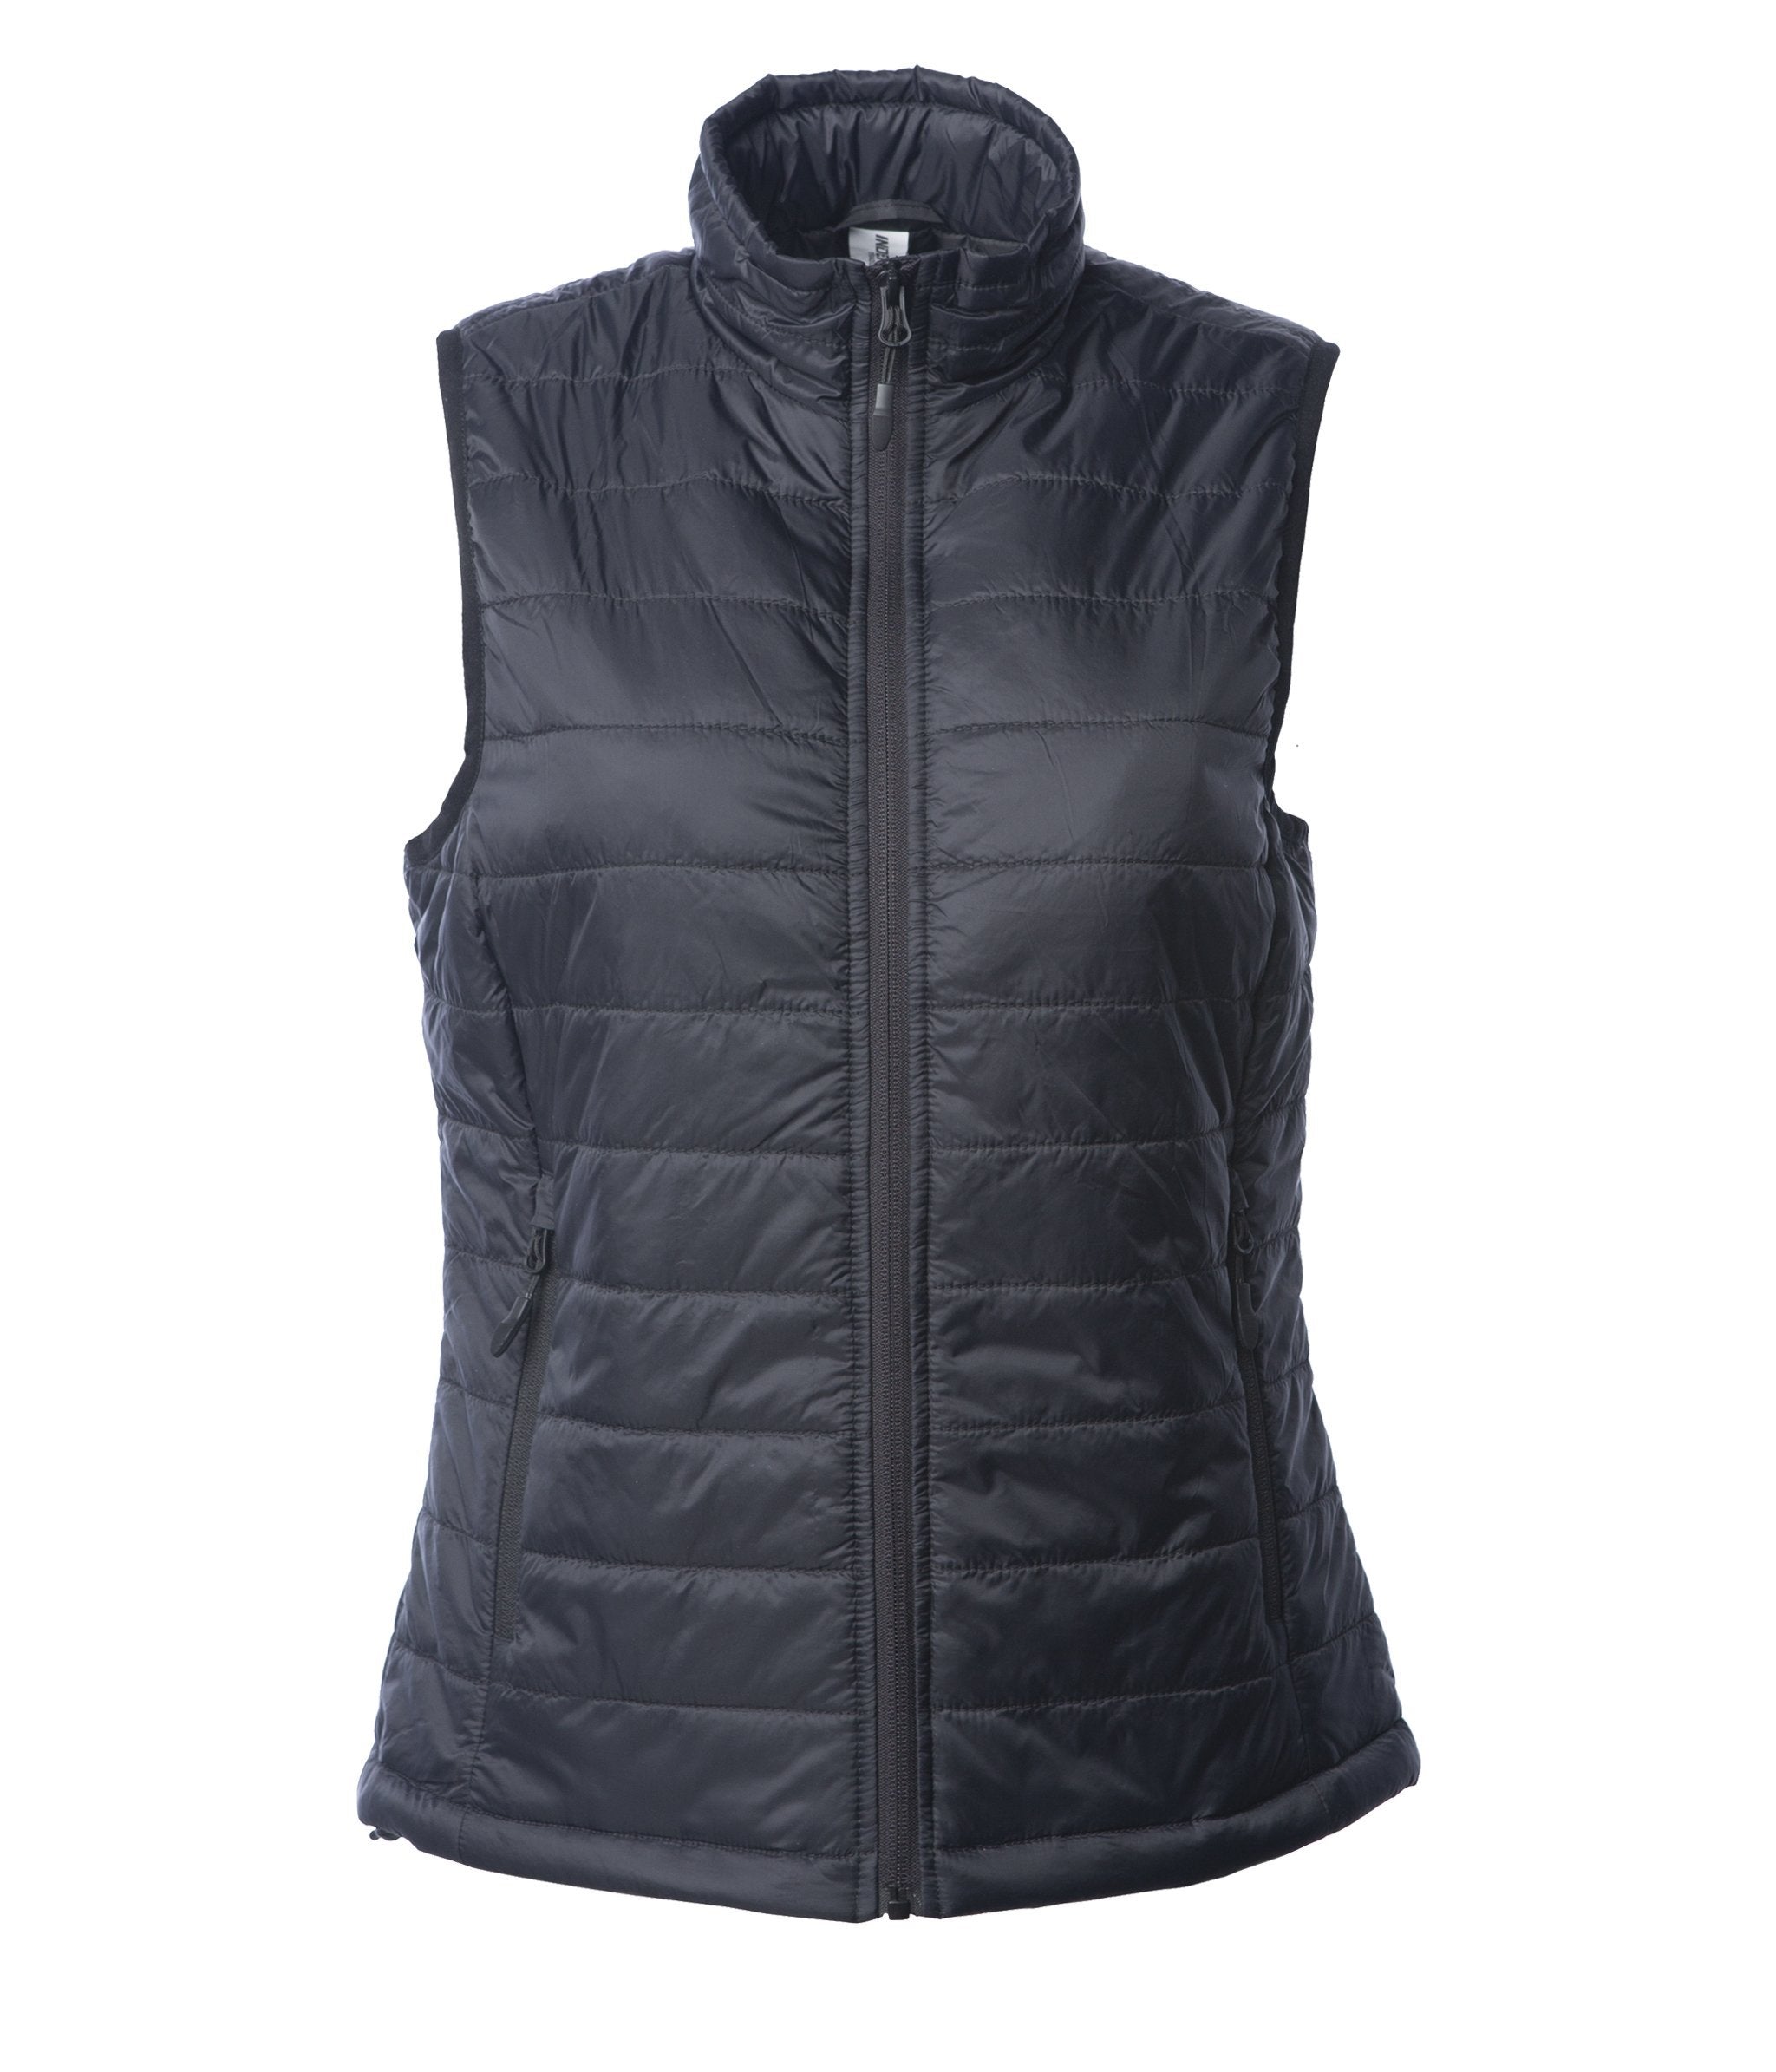 Women's Hyper-Loft Puffy Vest | Independent Trading Company